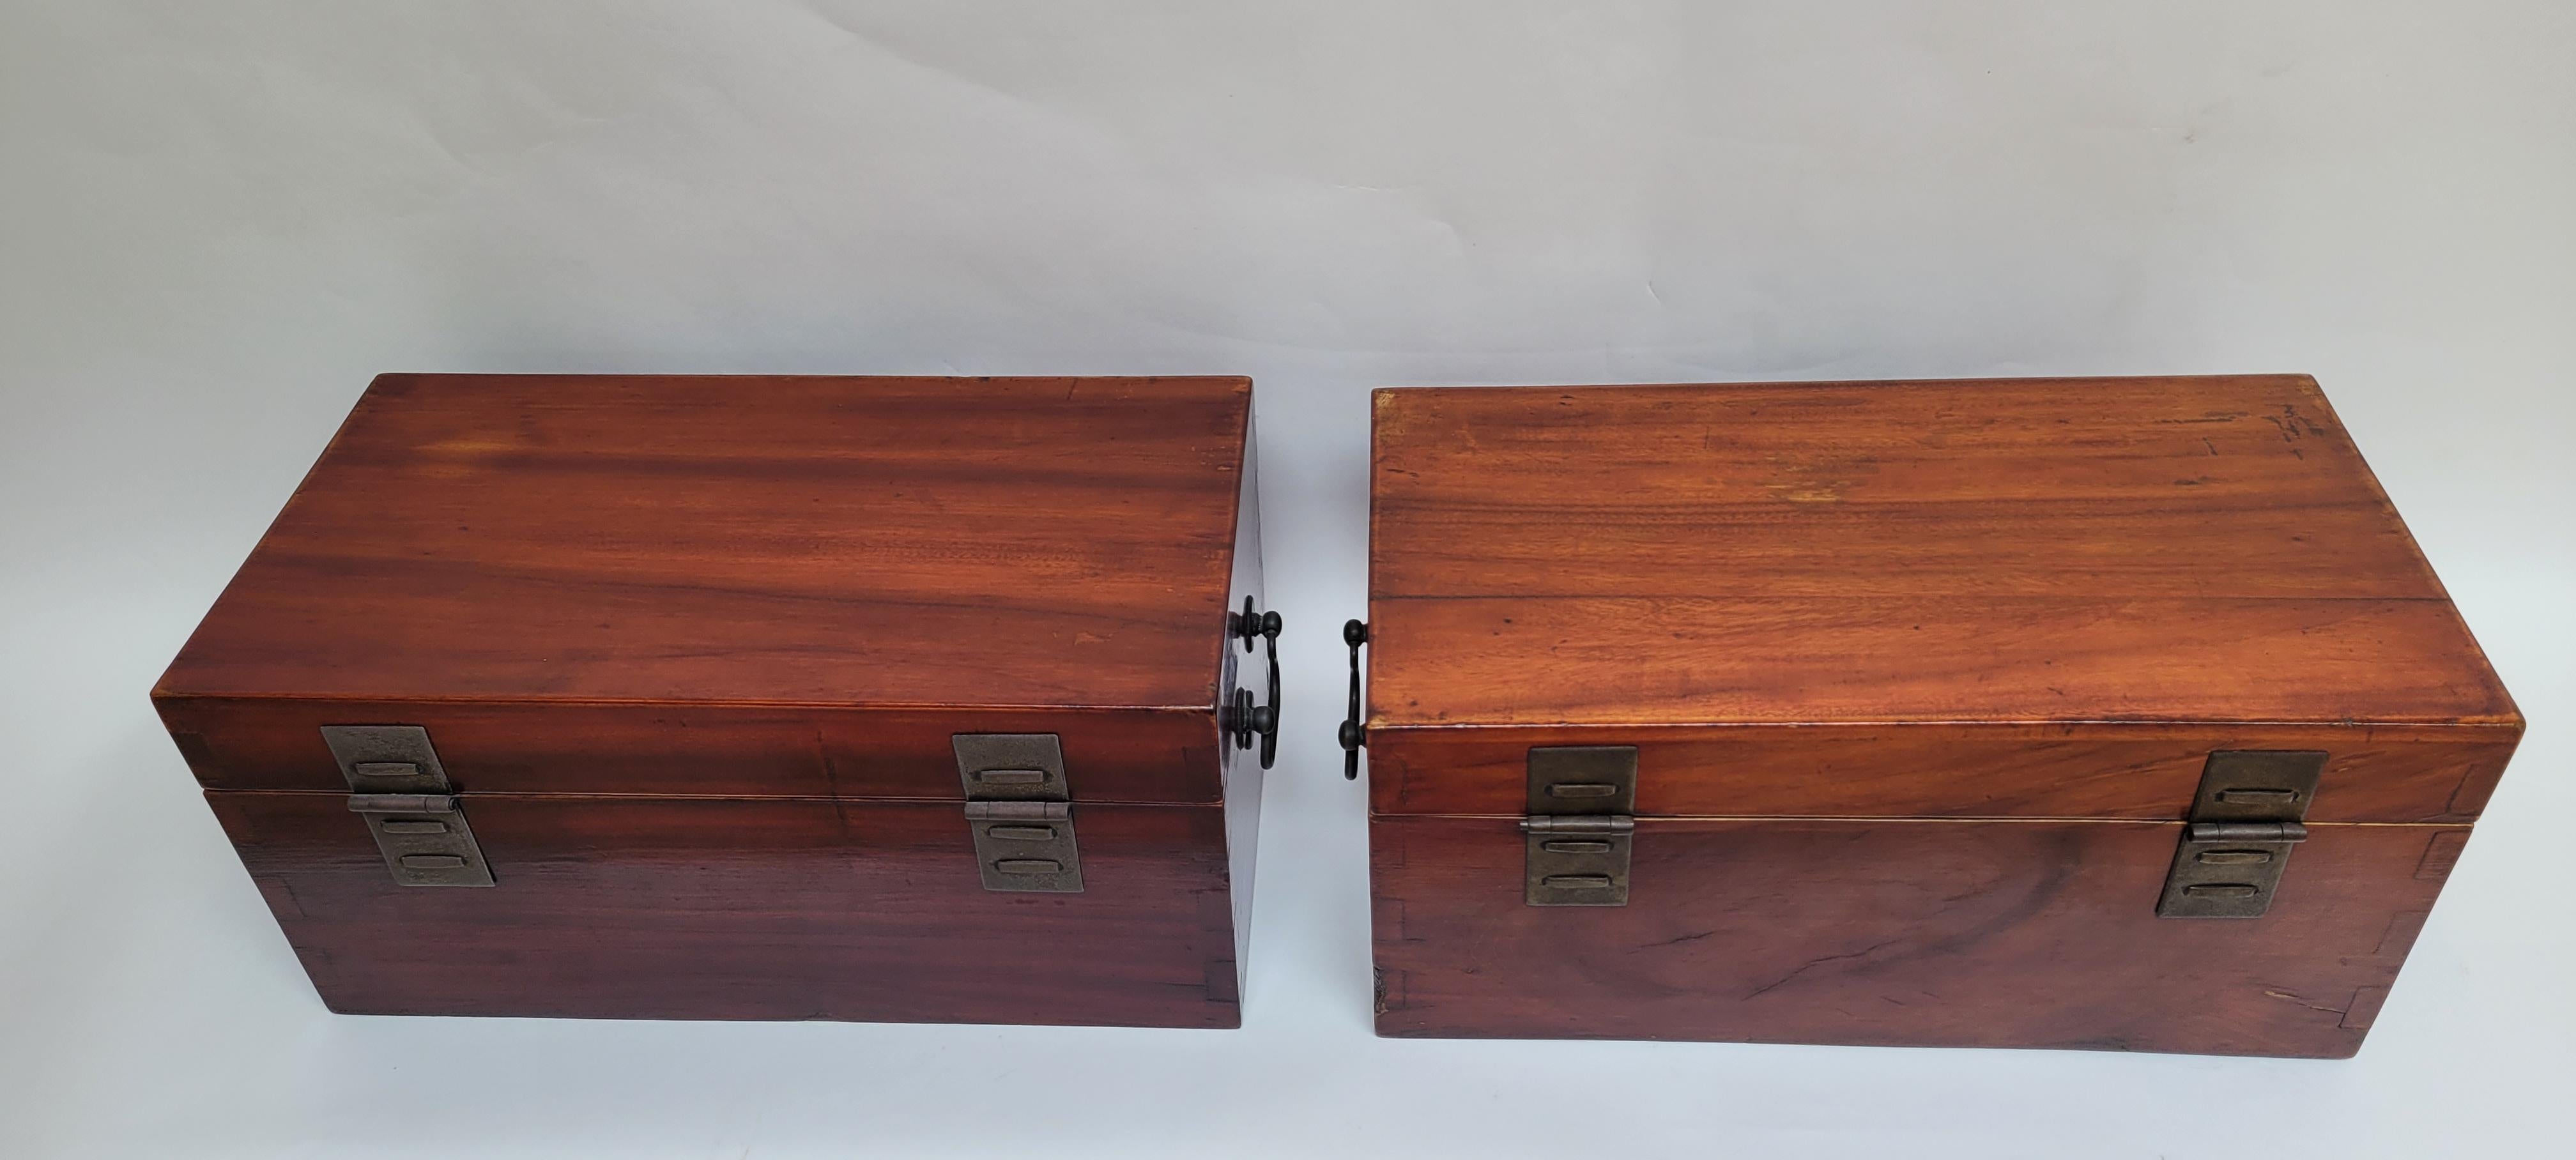 19th Century Pair of Camphor Boxes For Sale 2